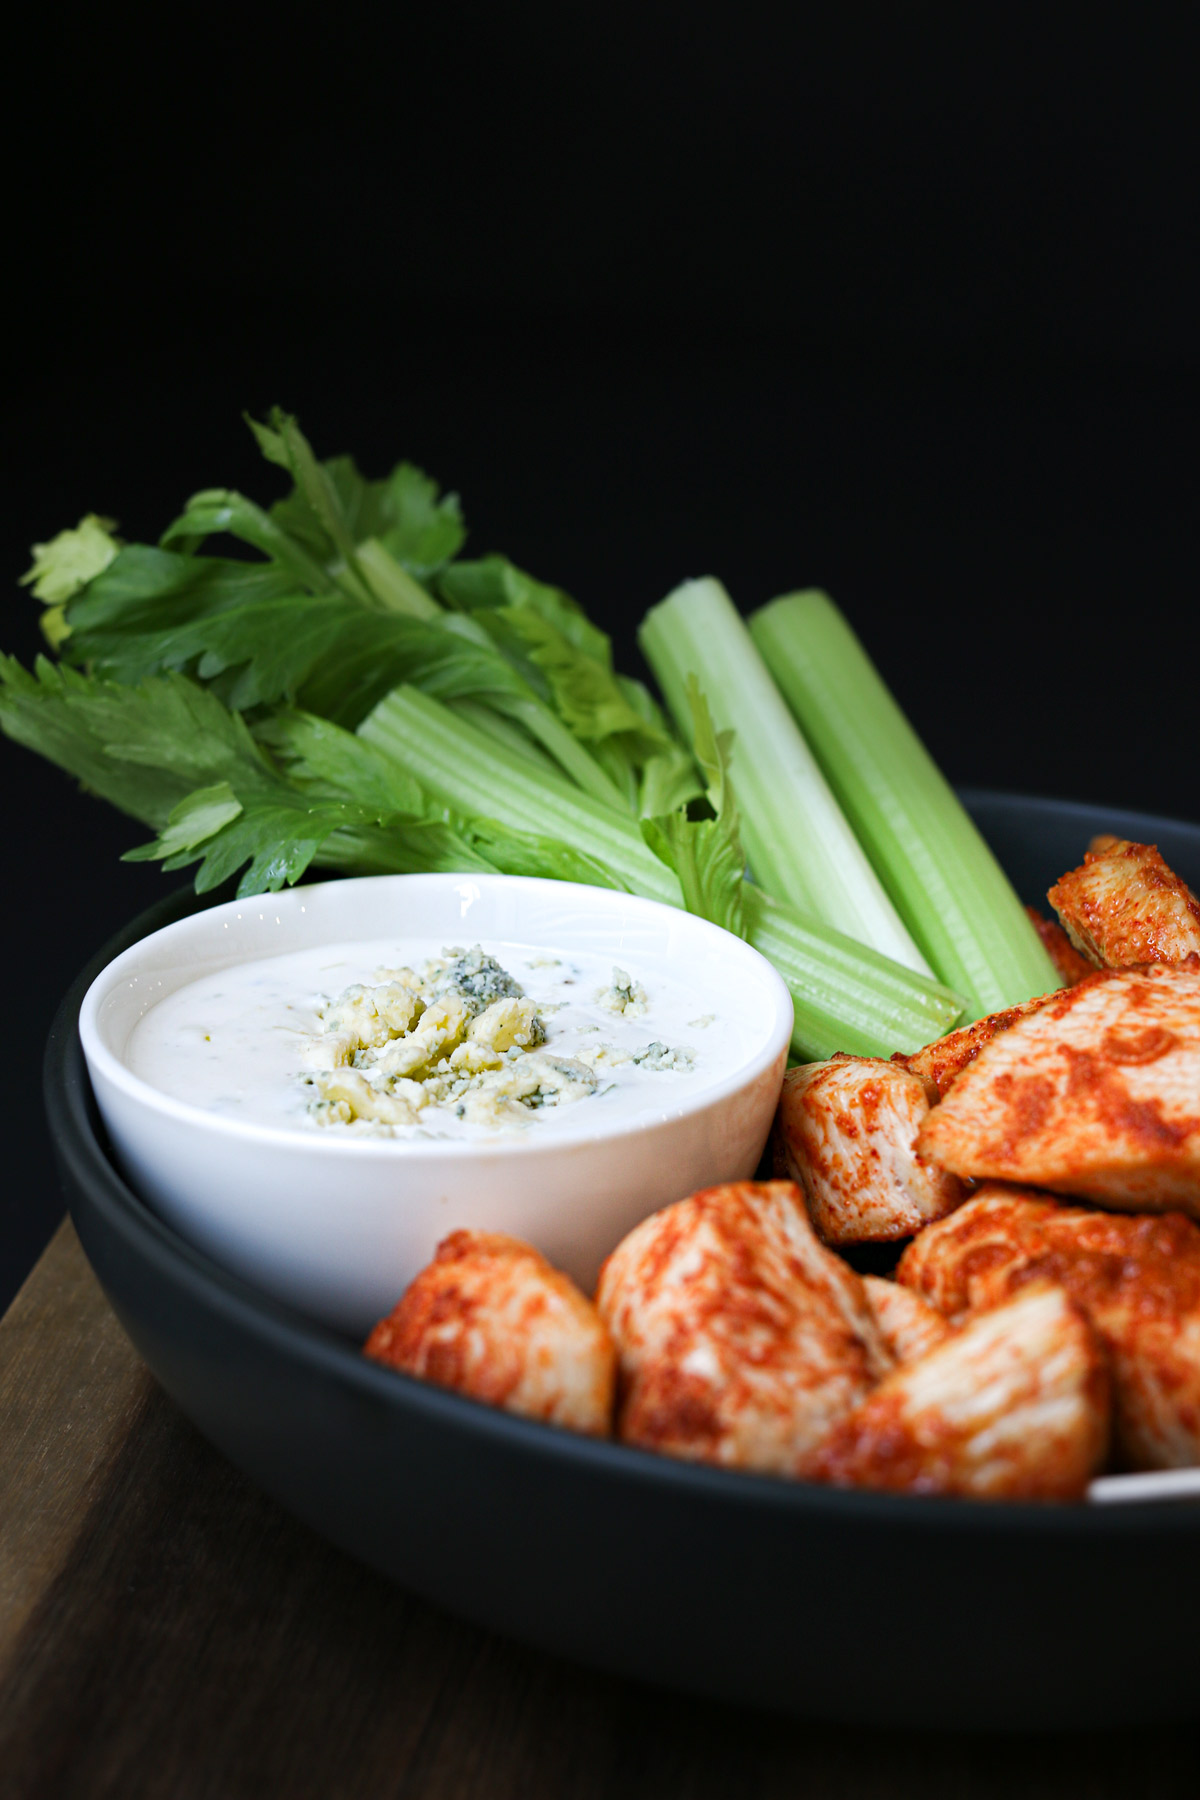 sideview shot of platter of celery and buffalo chicken bites with a small dish of blue cheese dressing.